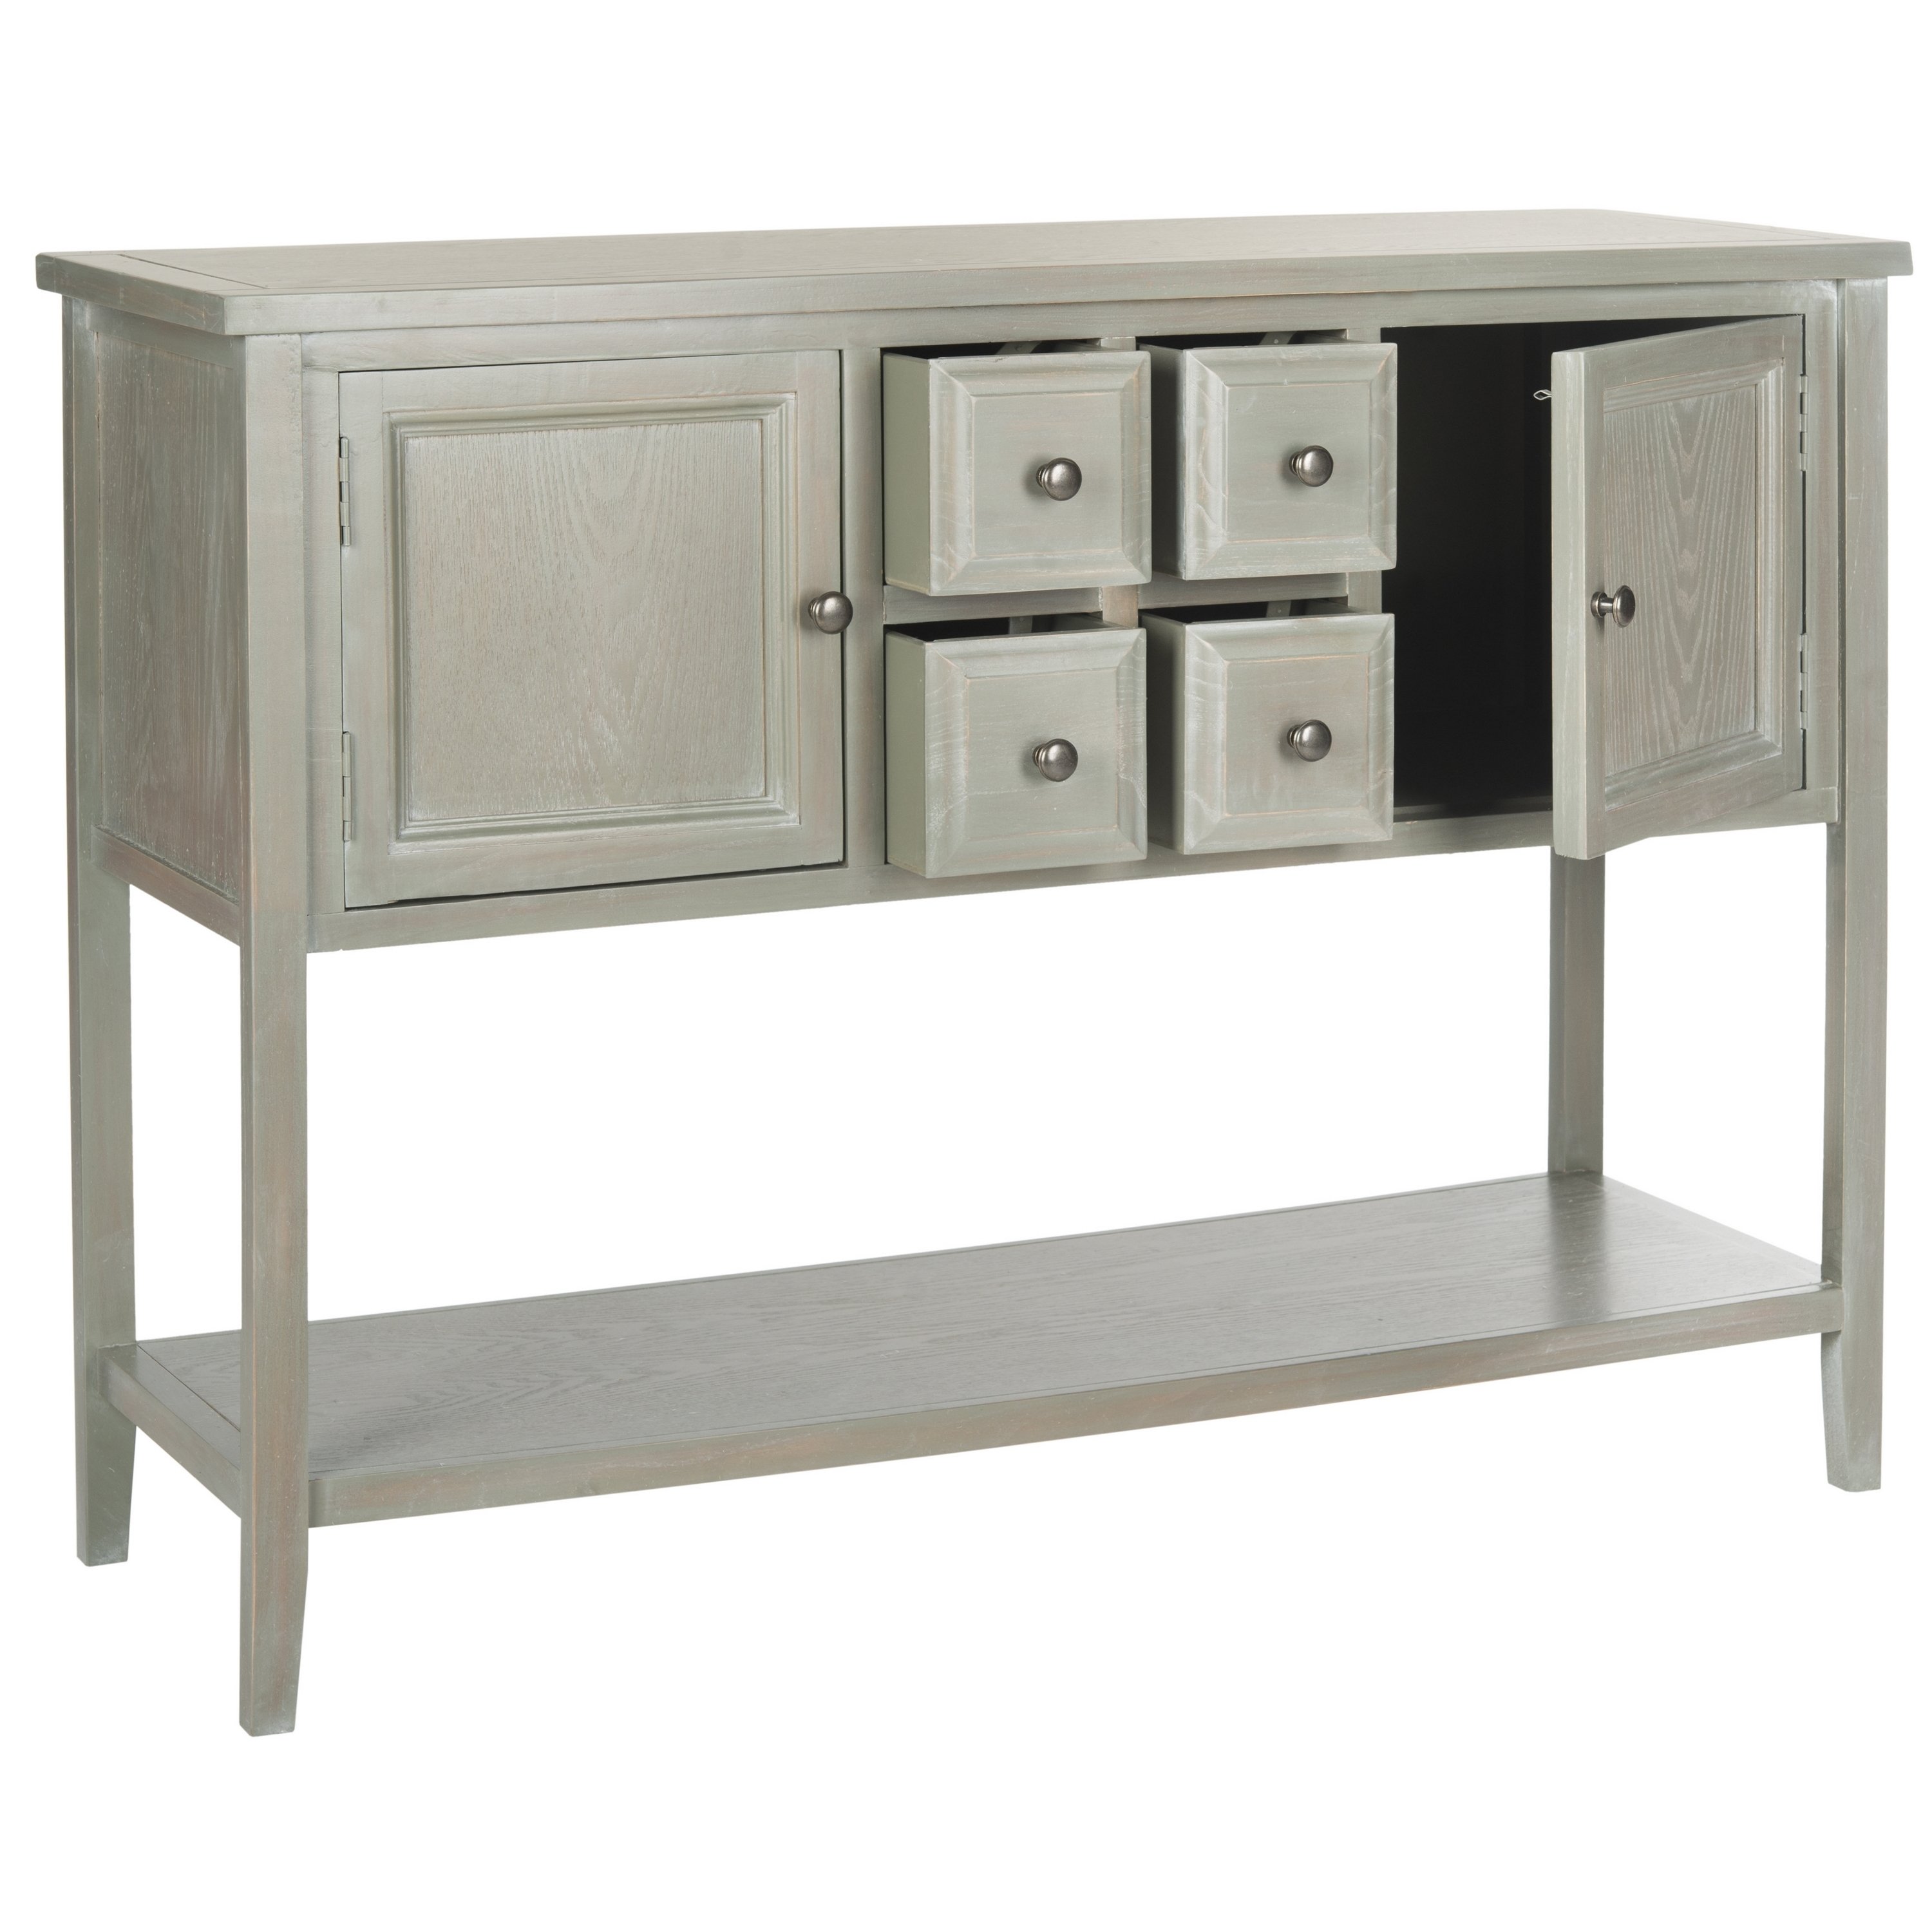 safavieh charlotte ash grey storage sideboard free janika accent table shipping today pedestal sound percussion drum throne tall hallway cabinet sofa legs chair cover factory